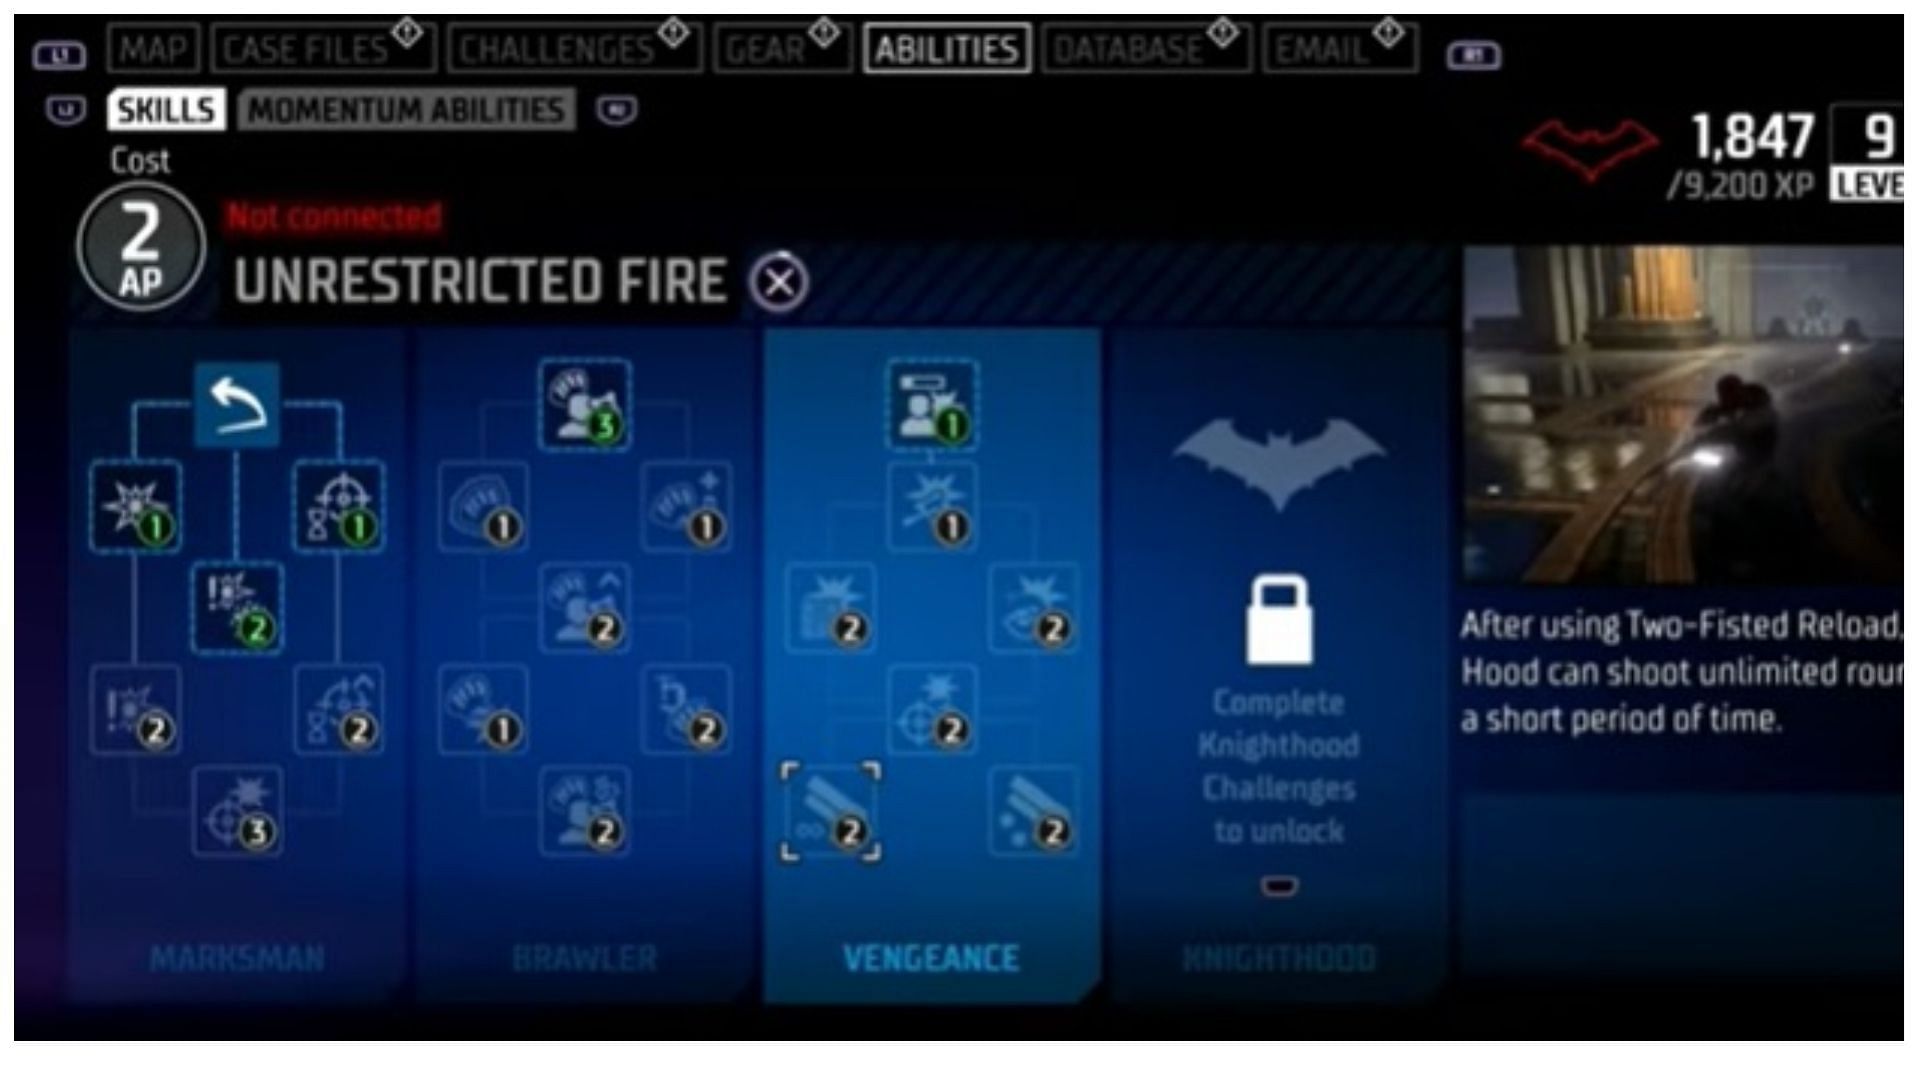 This skill complements Double Vortex. (image via YouTube/TonyBingGaming)